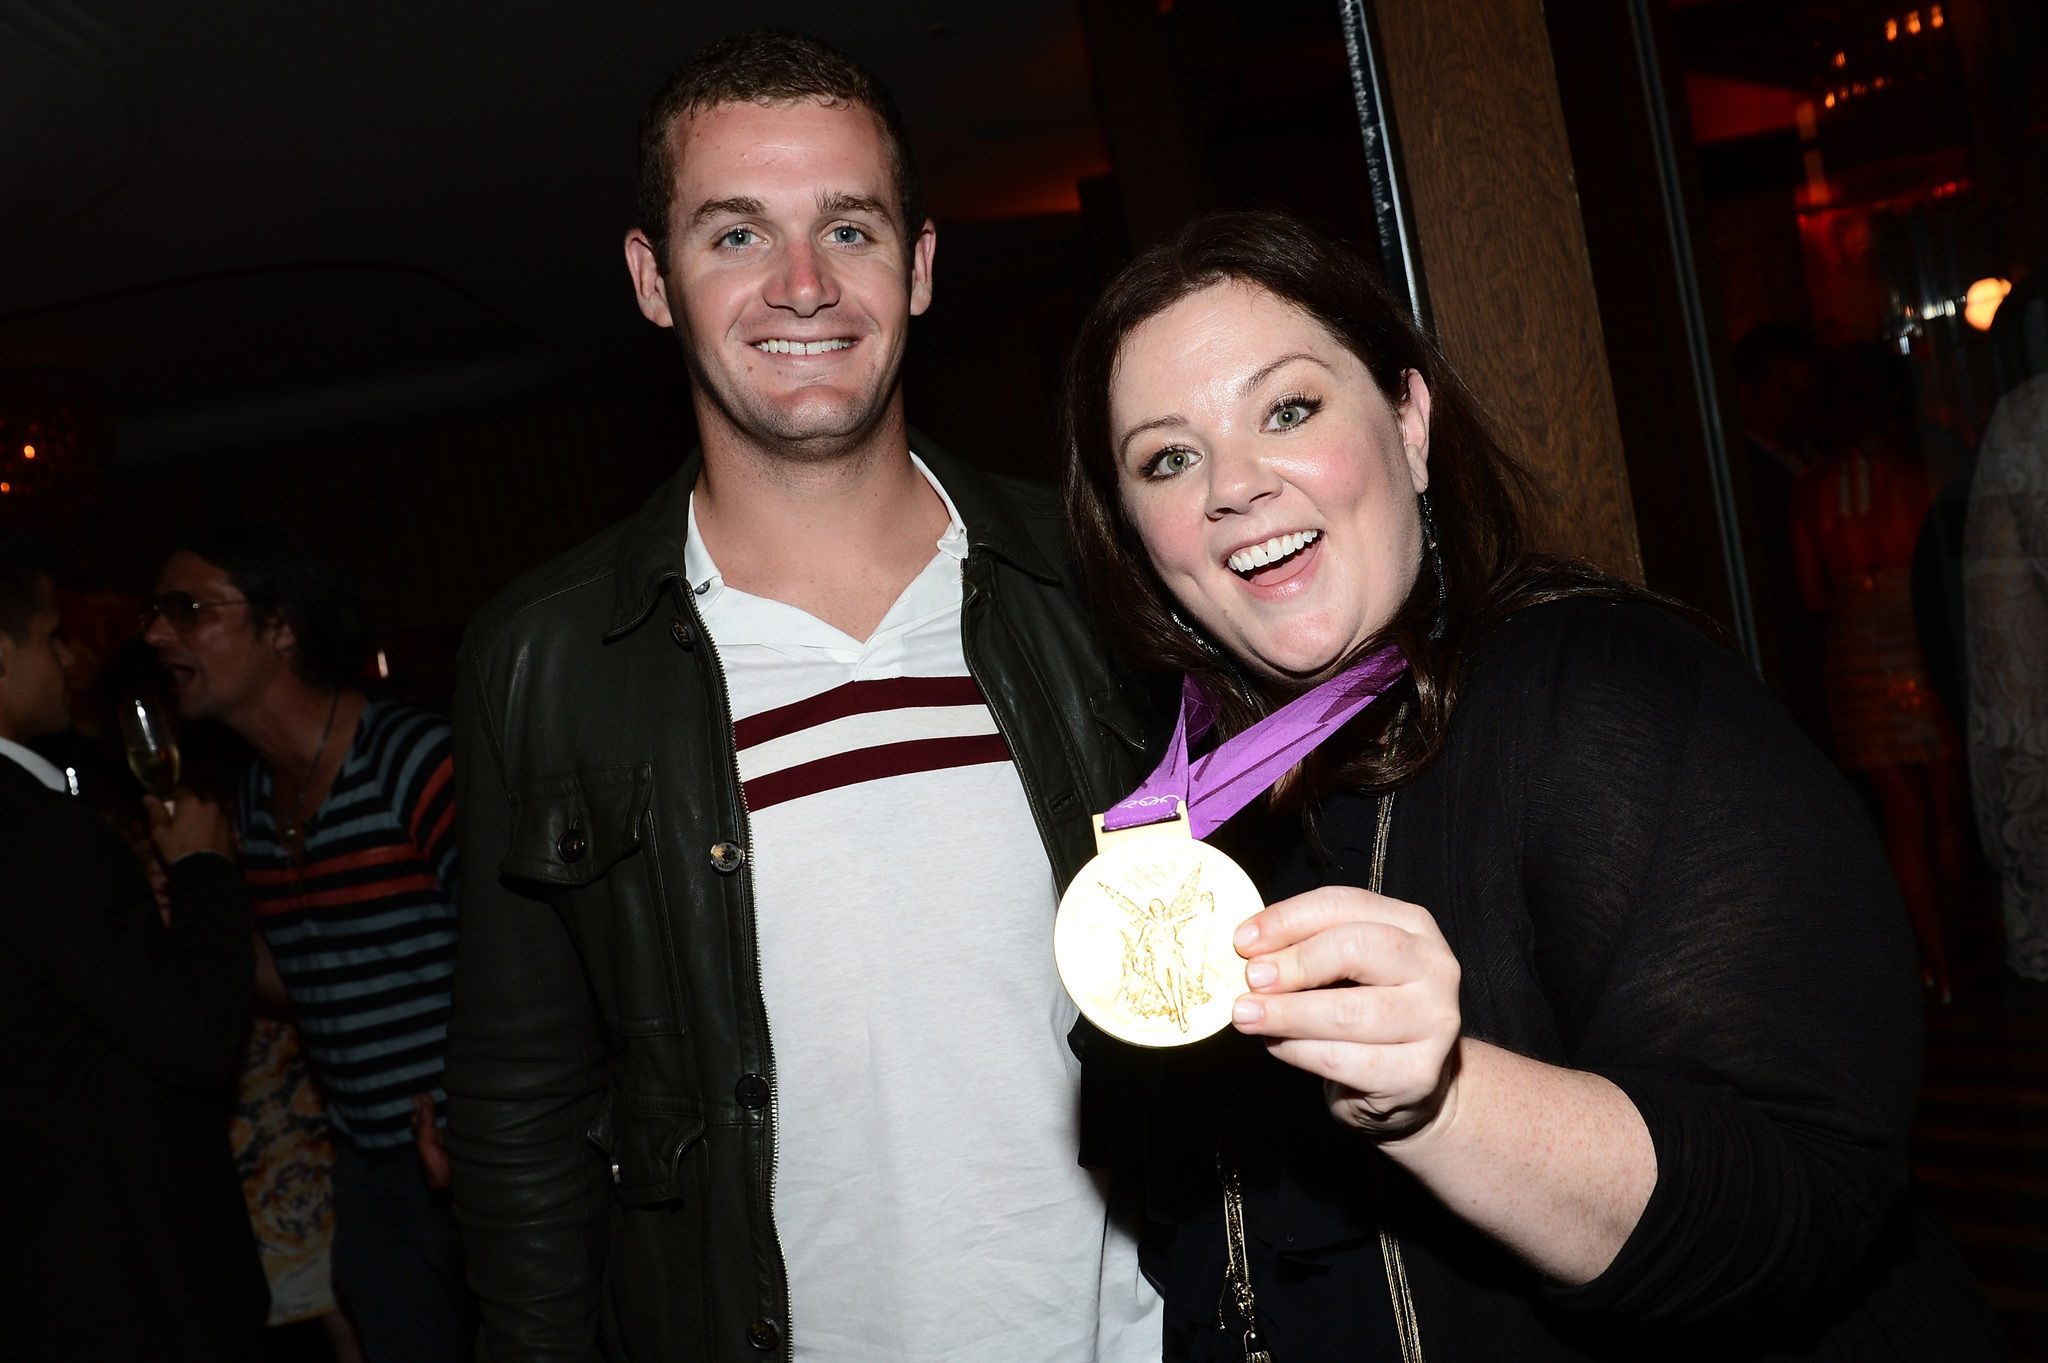 Olympic gold medalist Tyler Clary and actress Melissa McCarthy